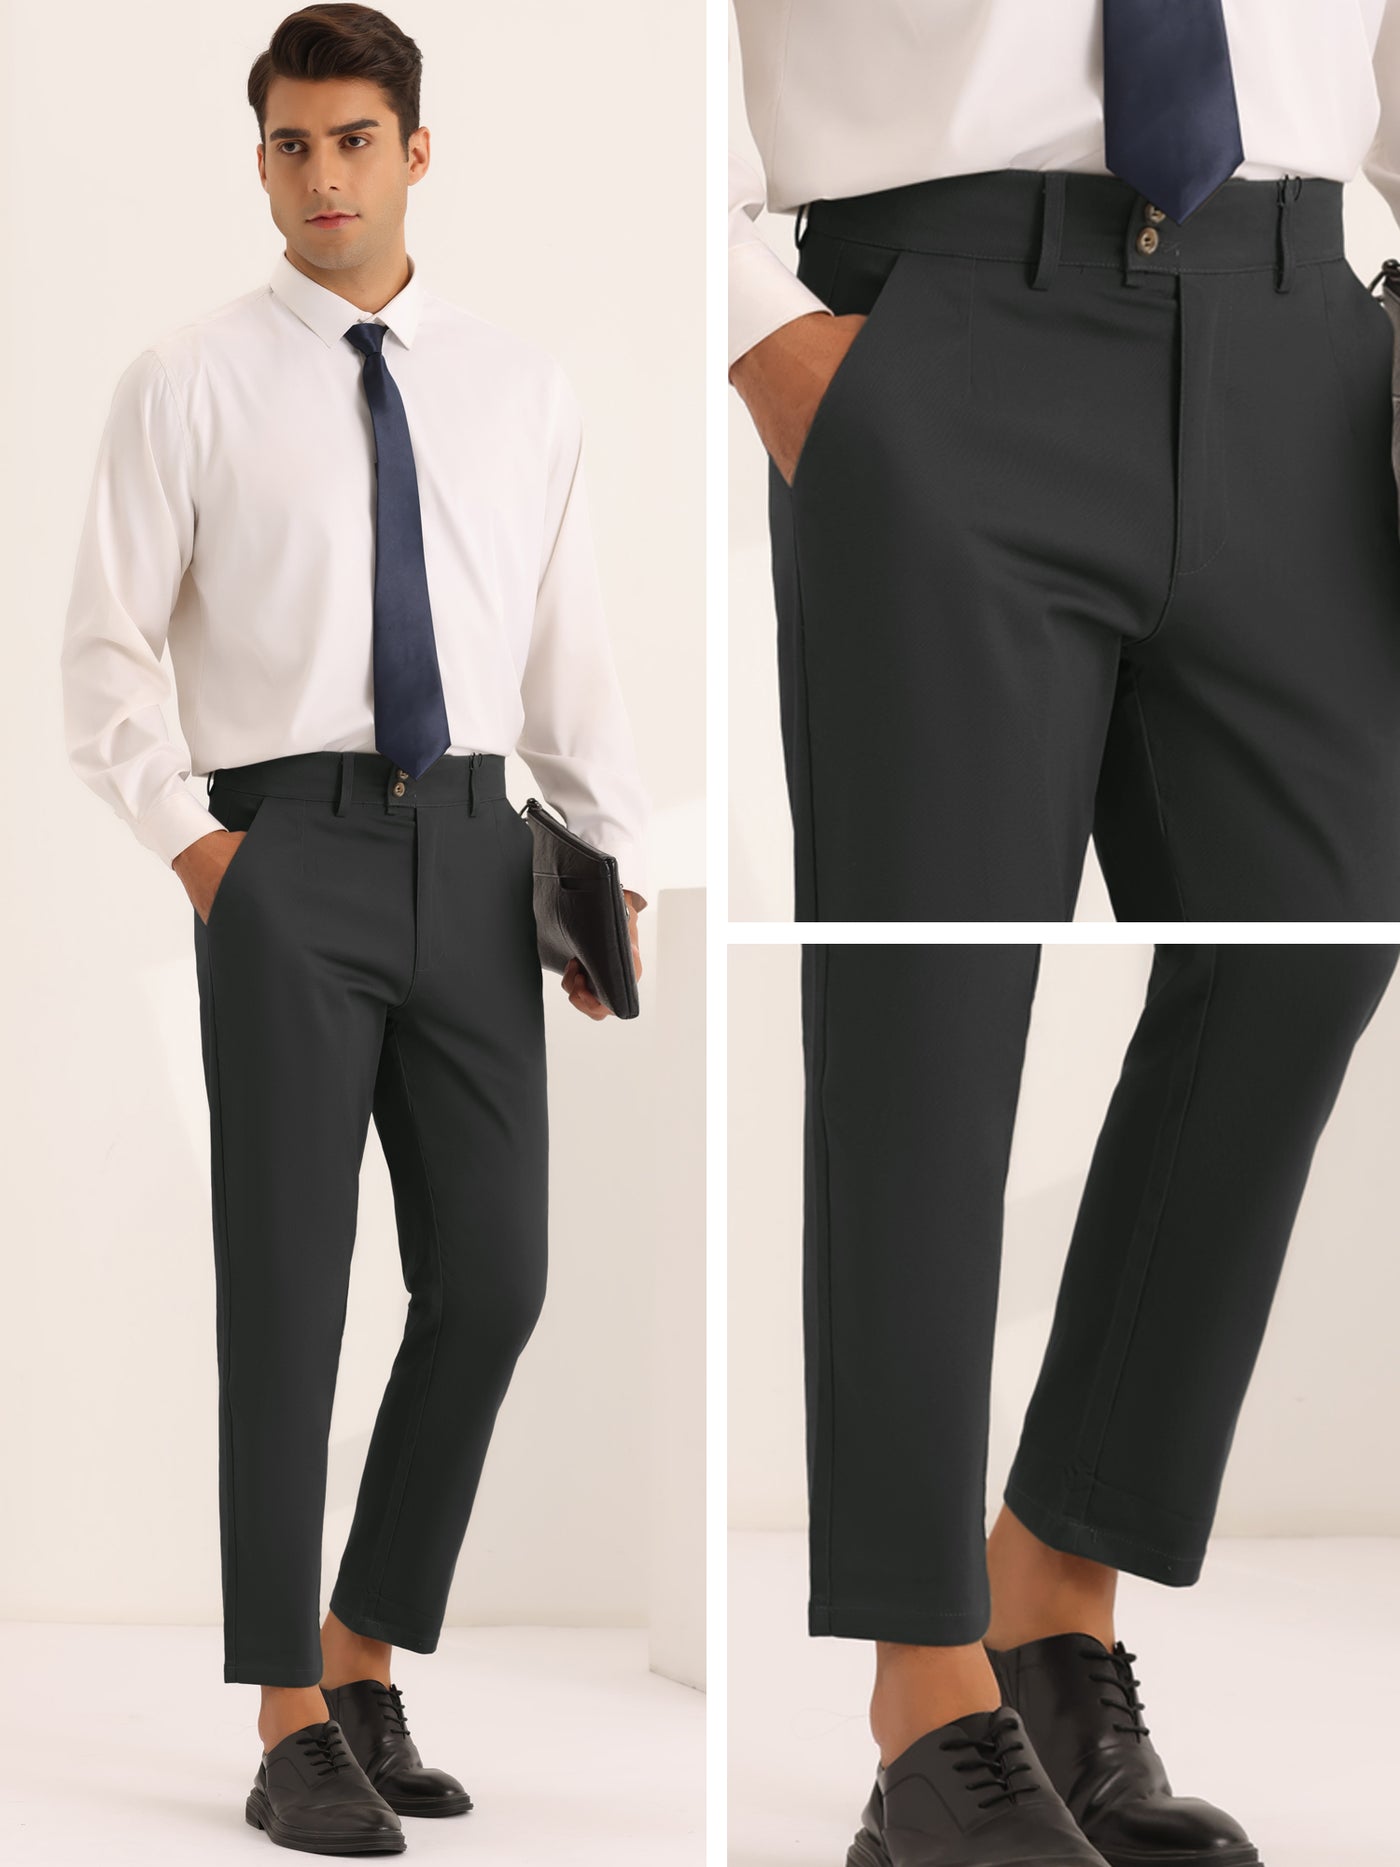 Bublédon Pleated Front Dress Pants for Men's Solid Color High Waist Business Trousers